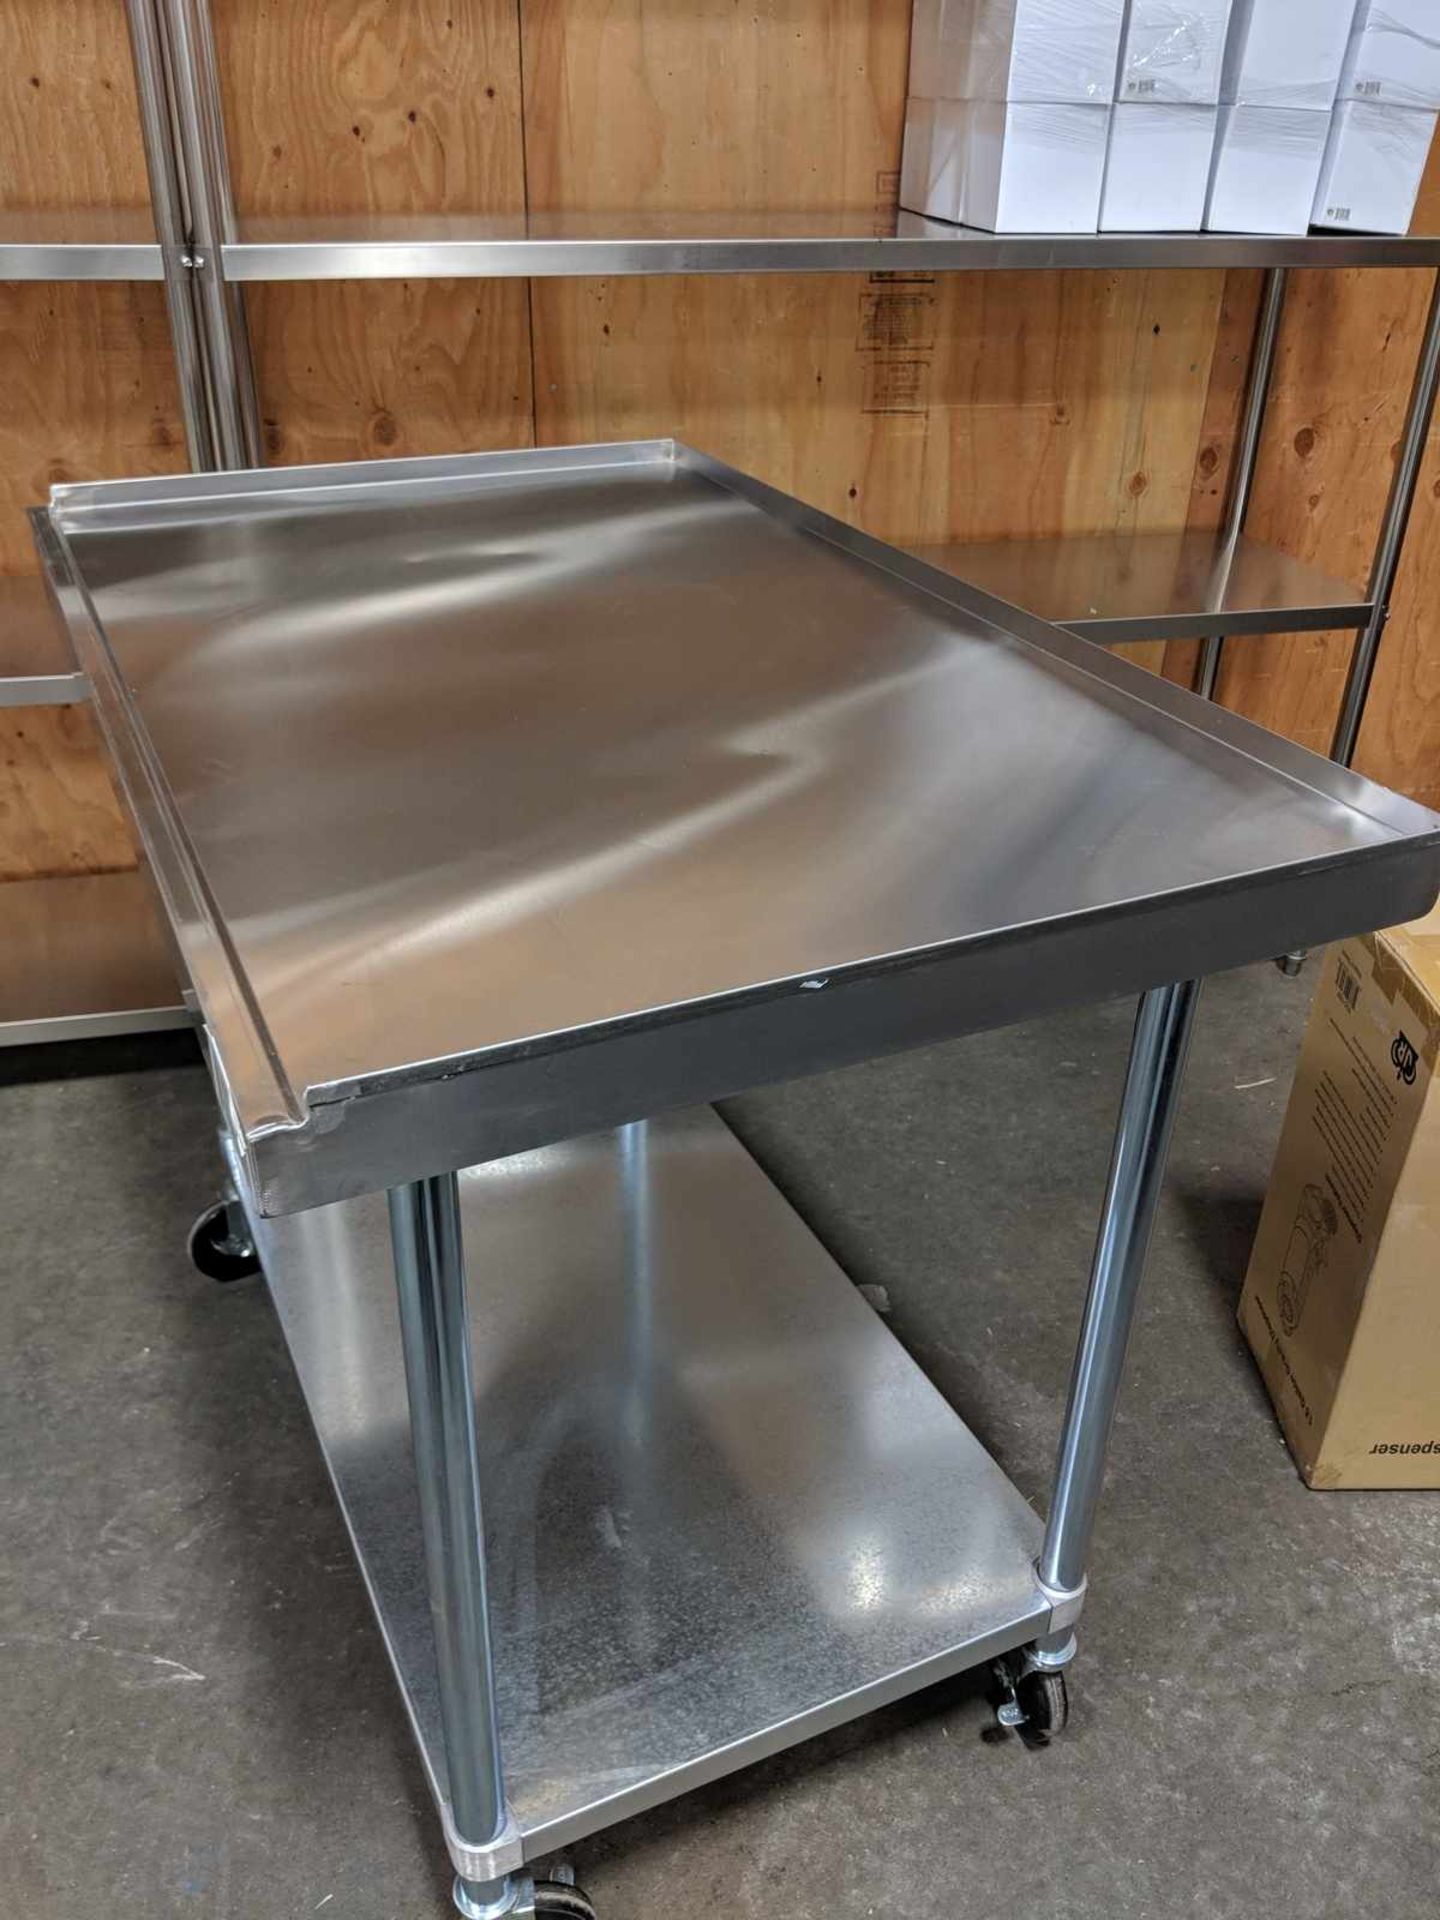 30" x 49" x 40" Work Table with 1" Lip and Casters - Image 2 of 4